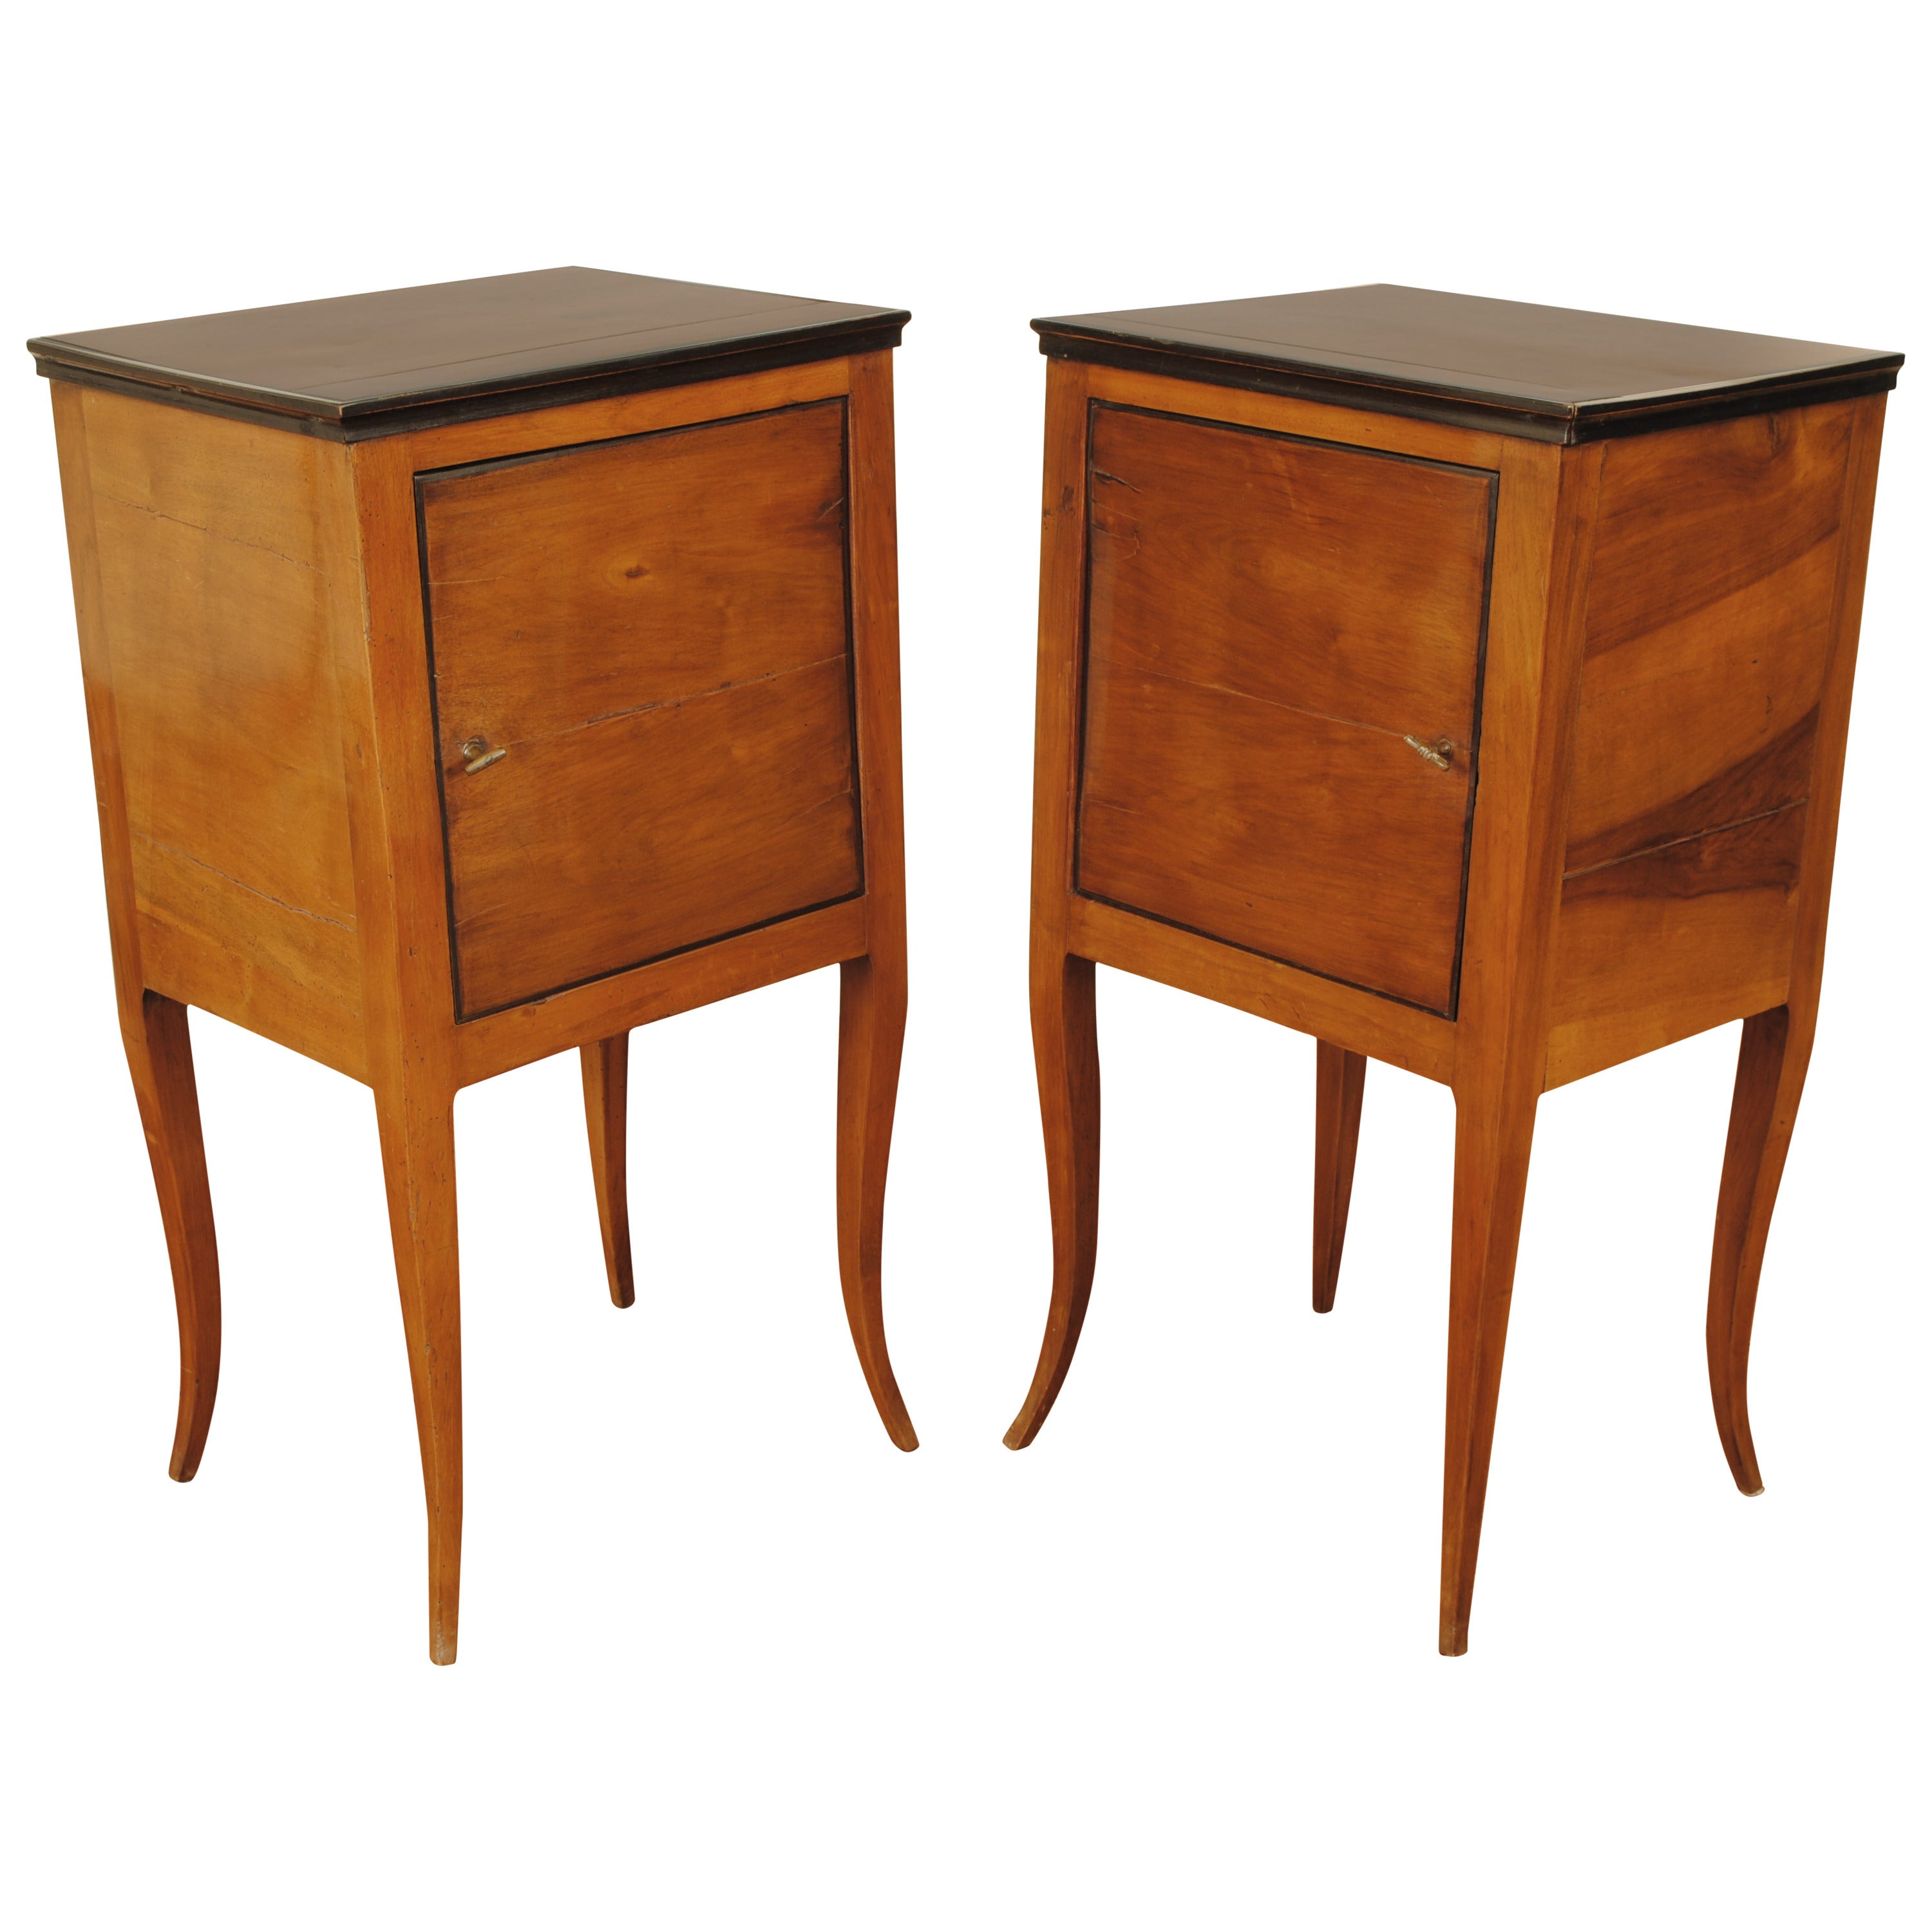 Pair of Italian Neoclassical Fruitwood and Ebonized Cabinets, 19th Century